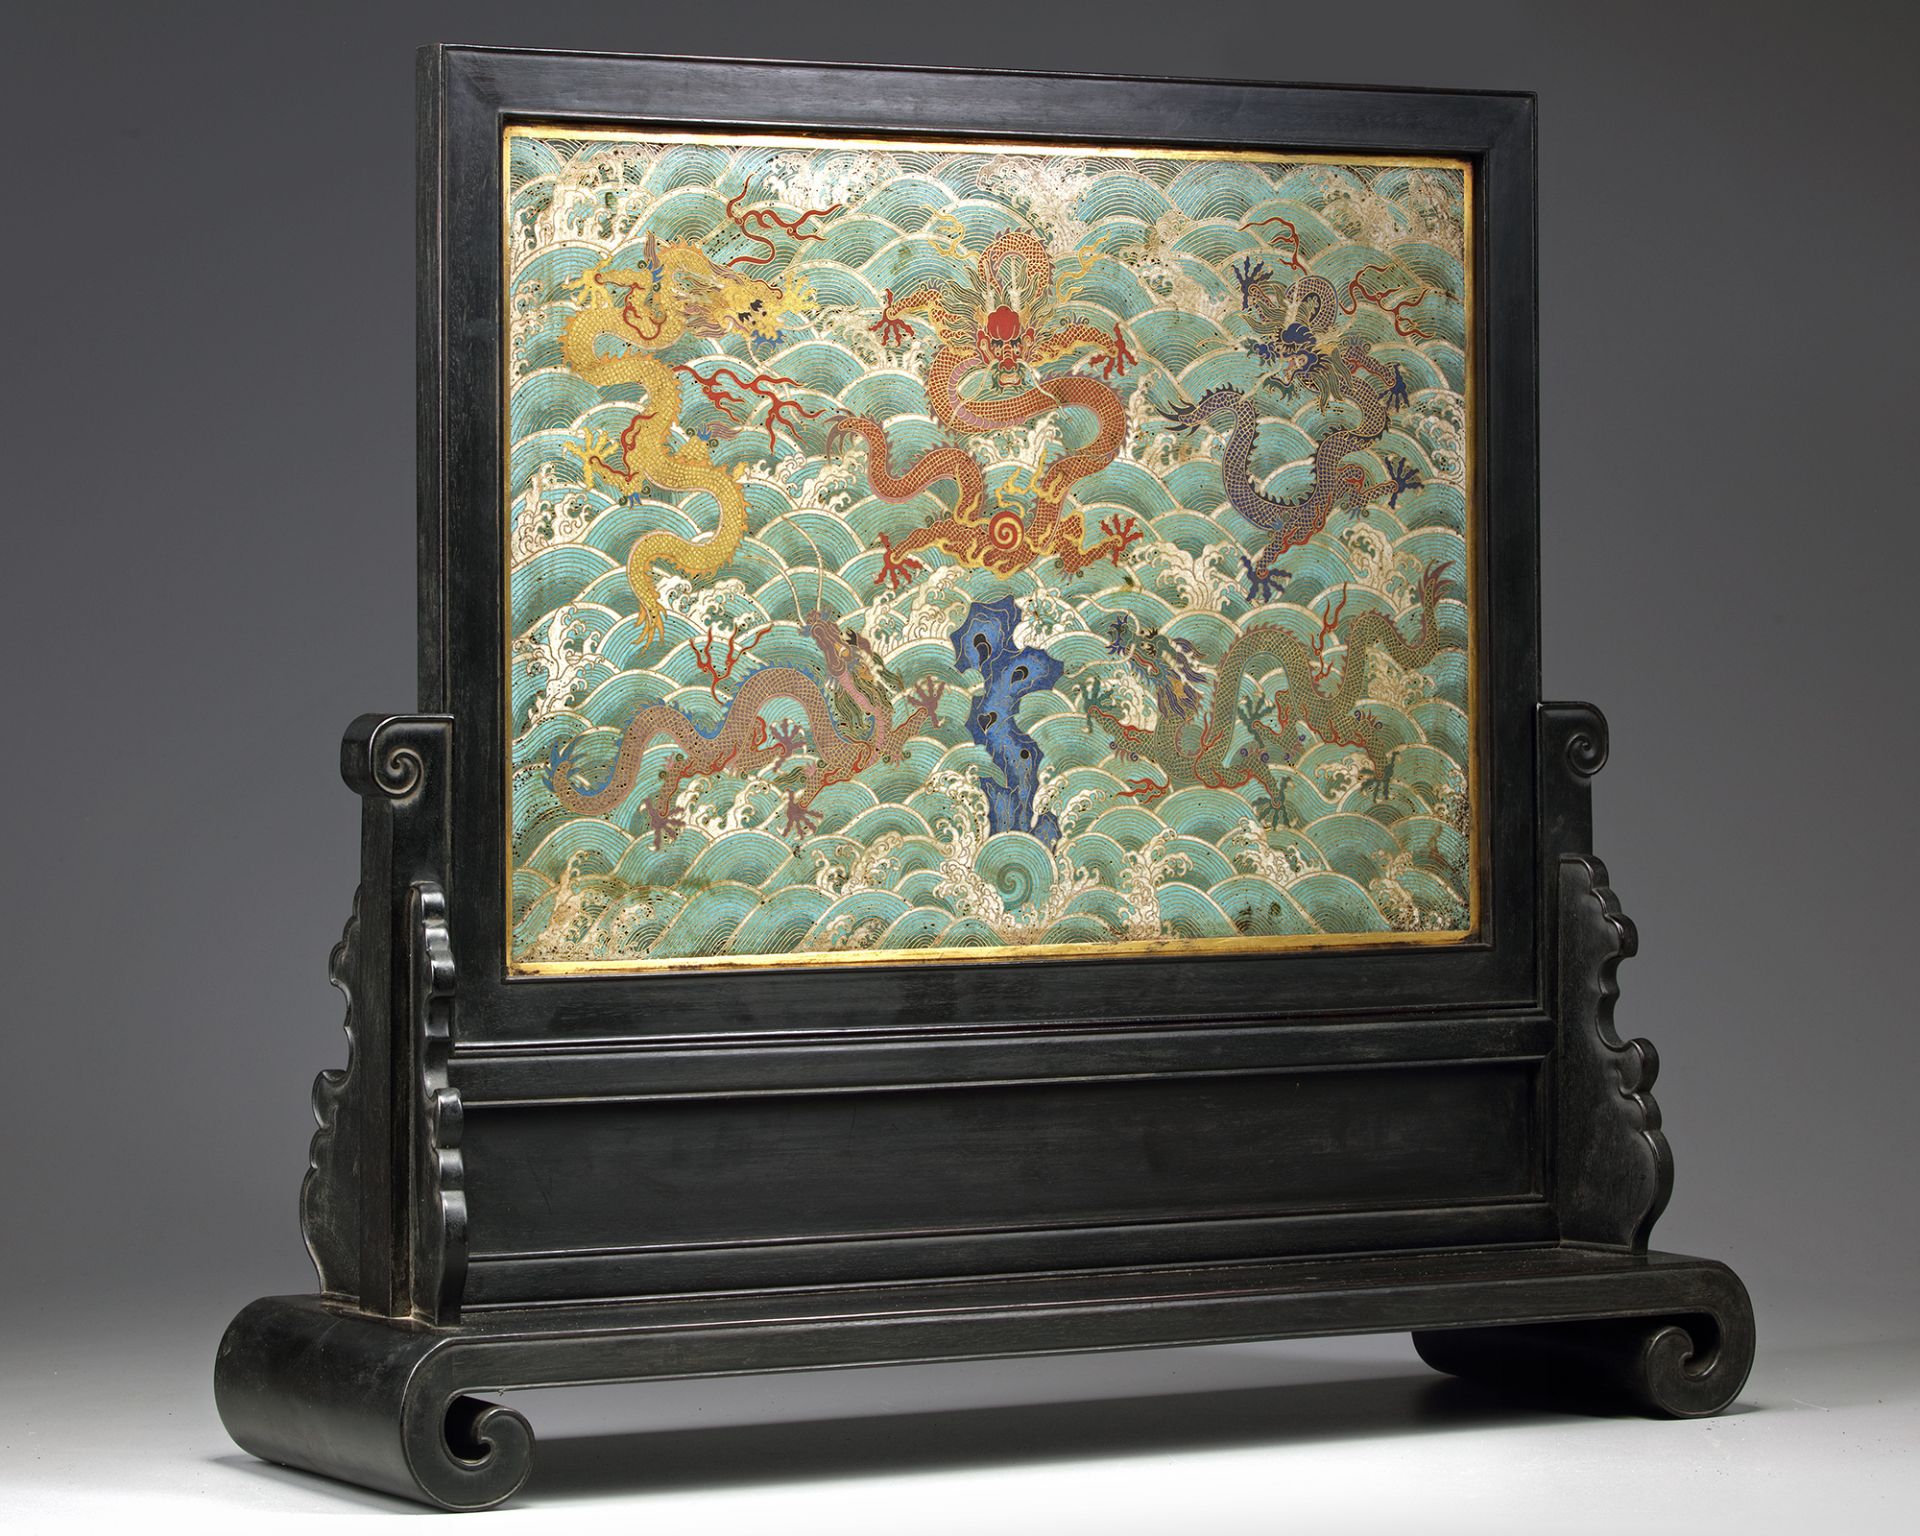 A CHINESE CLOISONNÉ ENAMEL 'FIVE DRAGONS' WOOD-INSET TABLE SCREEN - Image 3 of 3